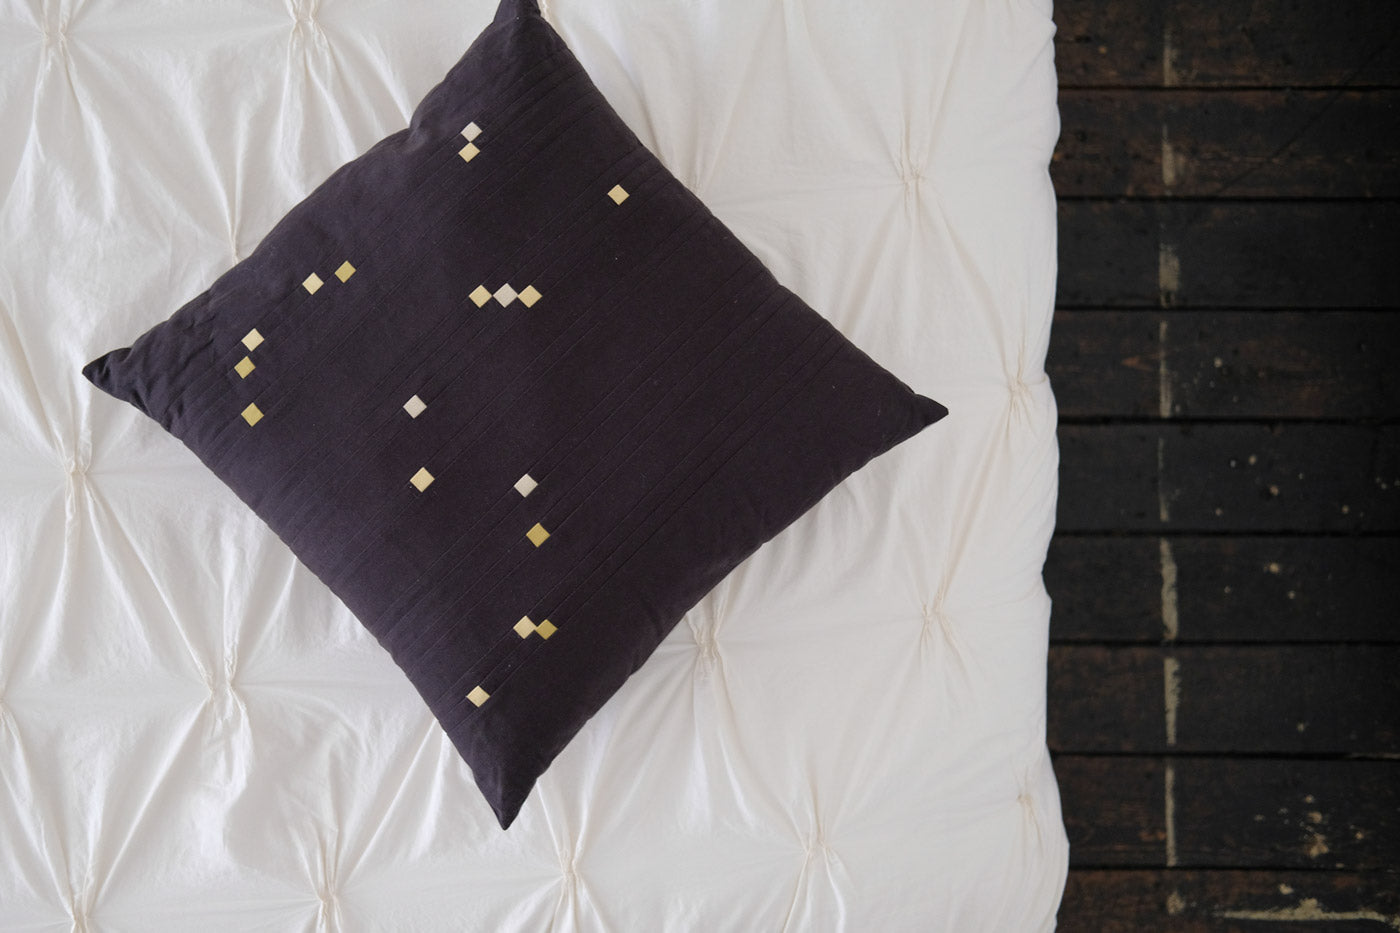 Orion Pillow on a white bed looking from above